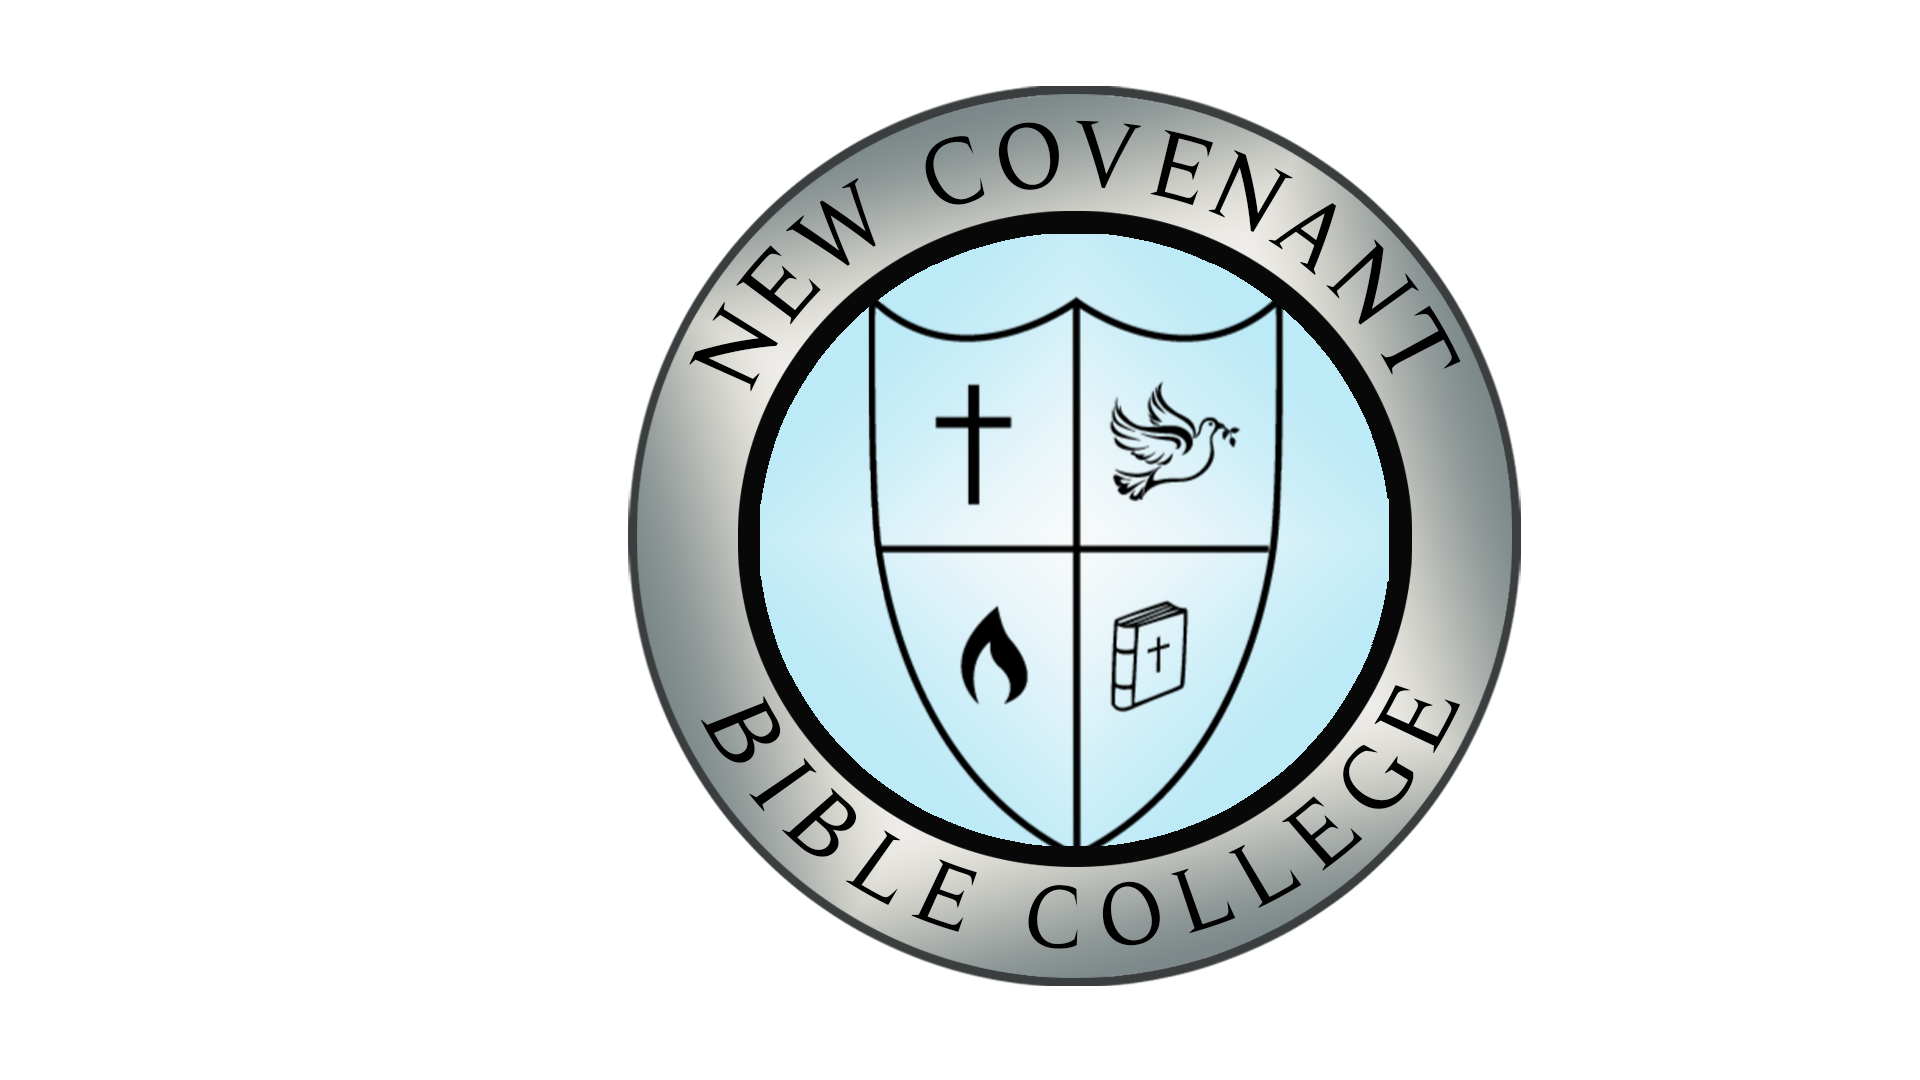 New Covenant Bible College